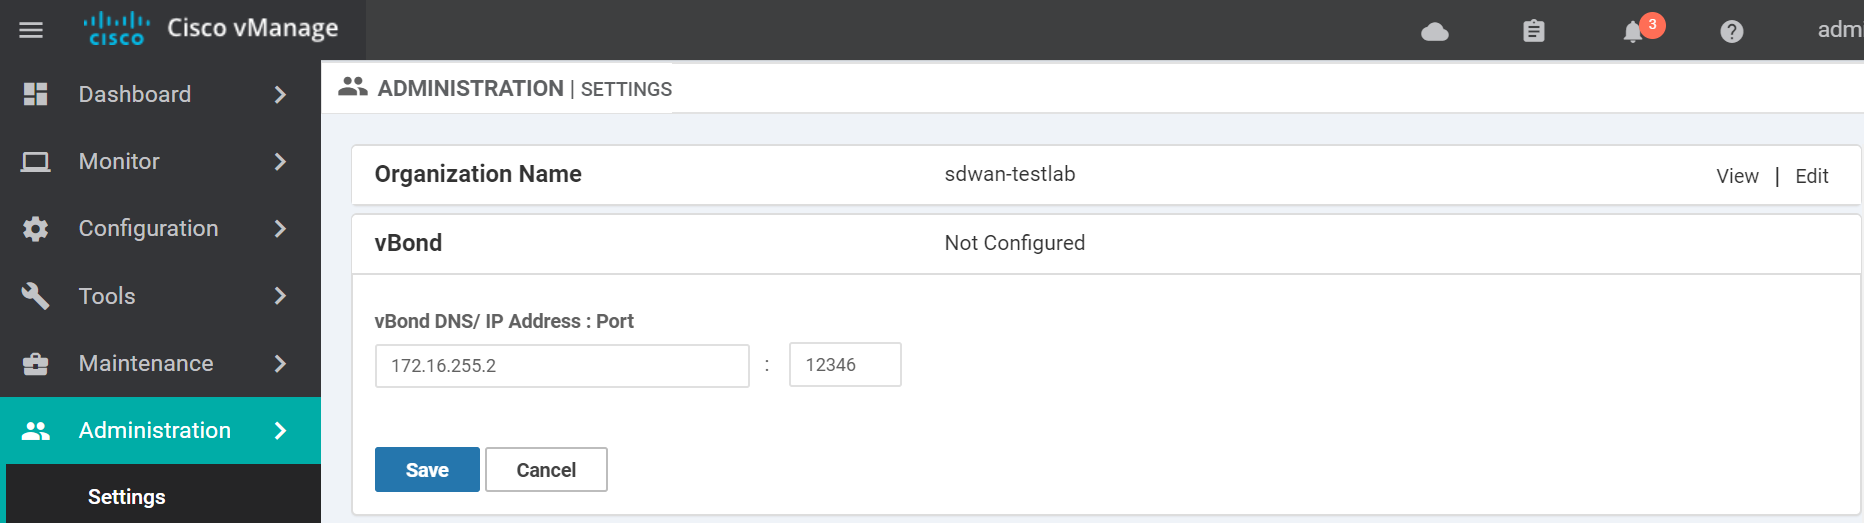 blog/cisco-sdwan-self-hosted-lab-part-2/vmanage-install-4.png